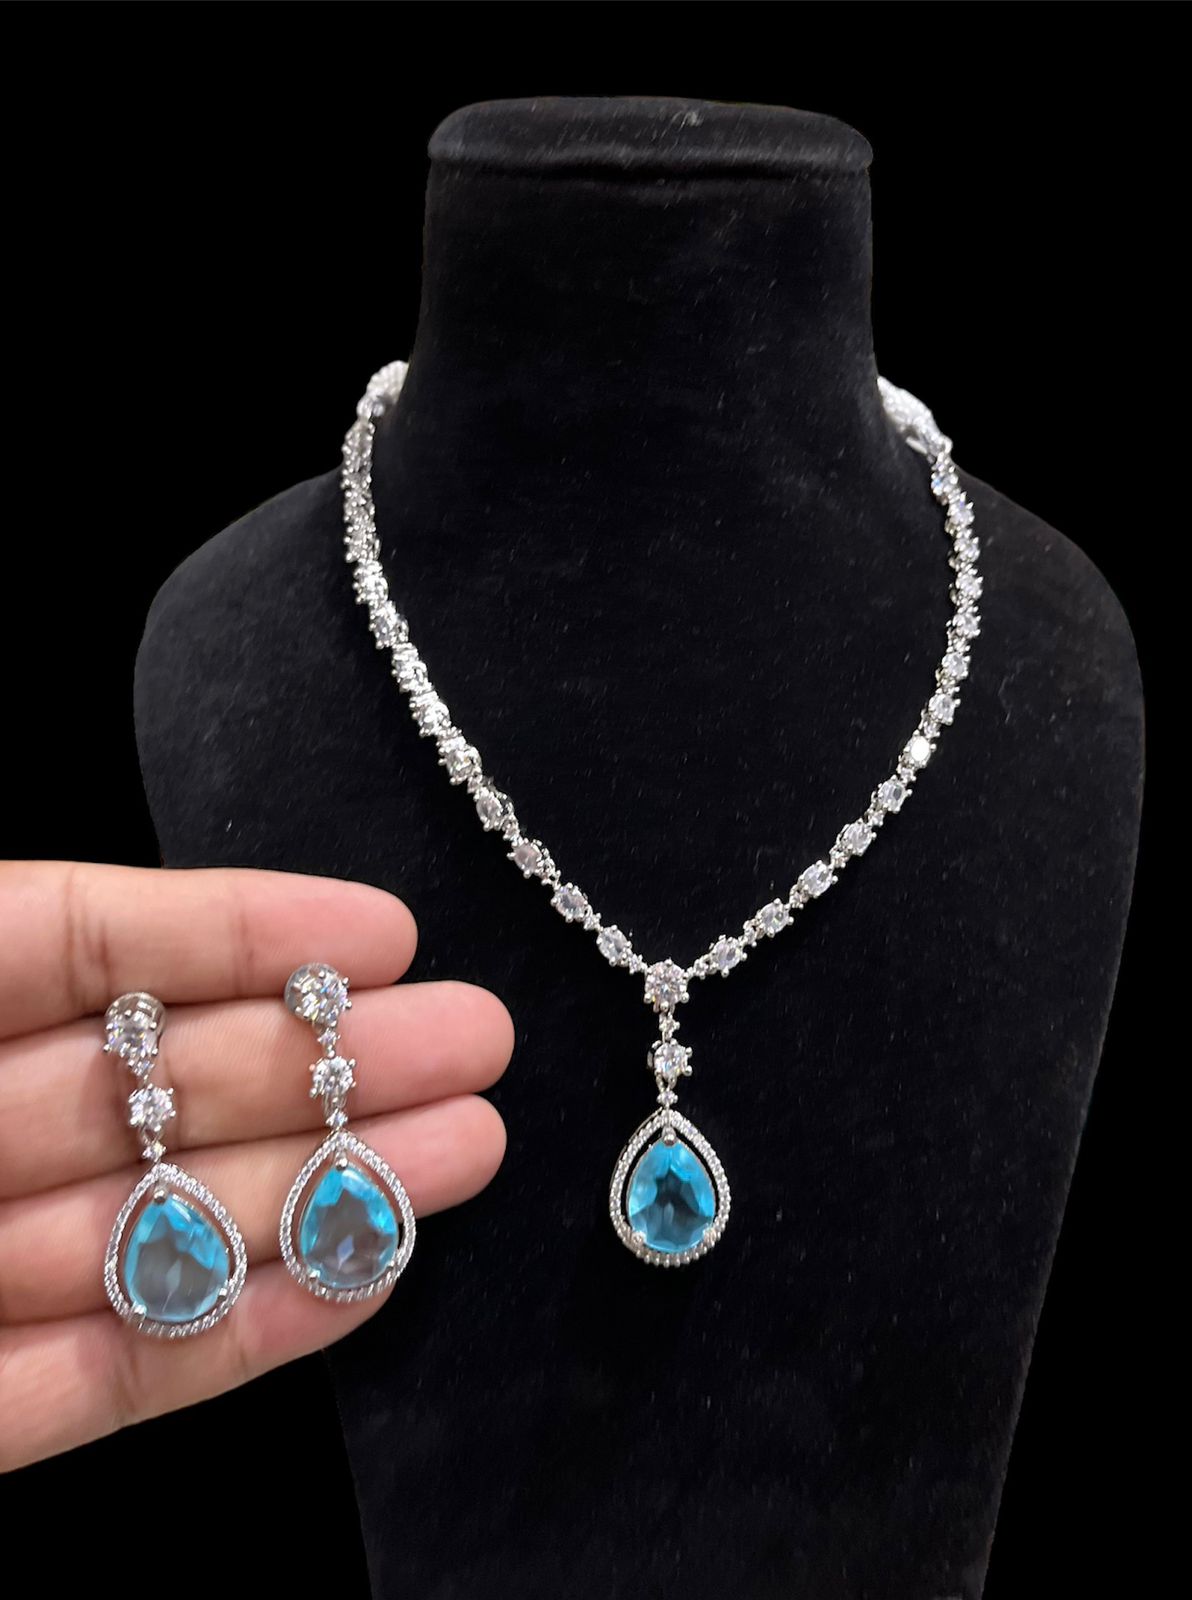 High quality American Diamond Necklace set with Earrings